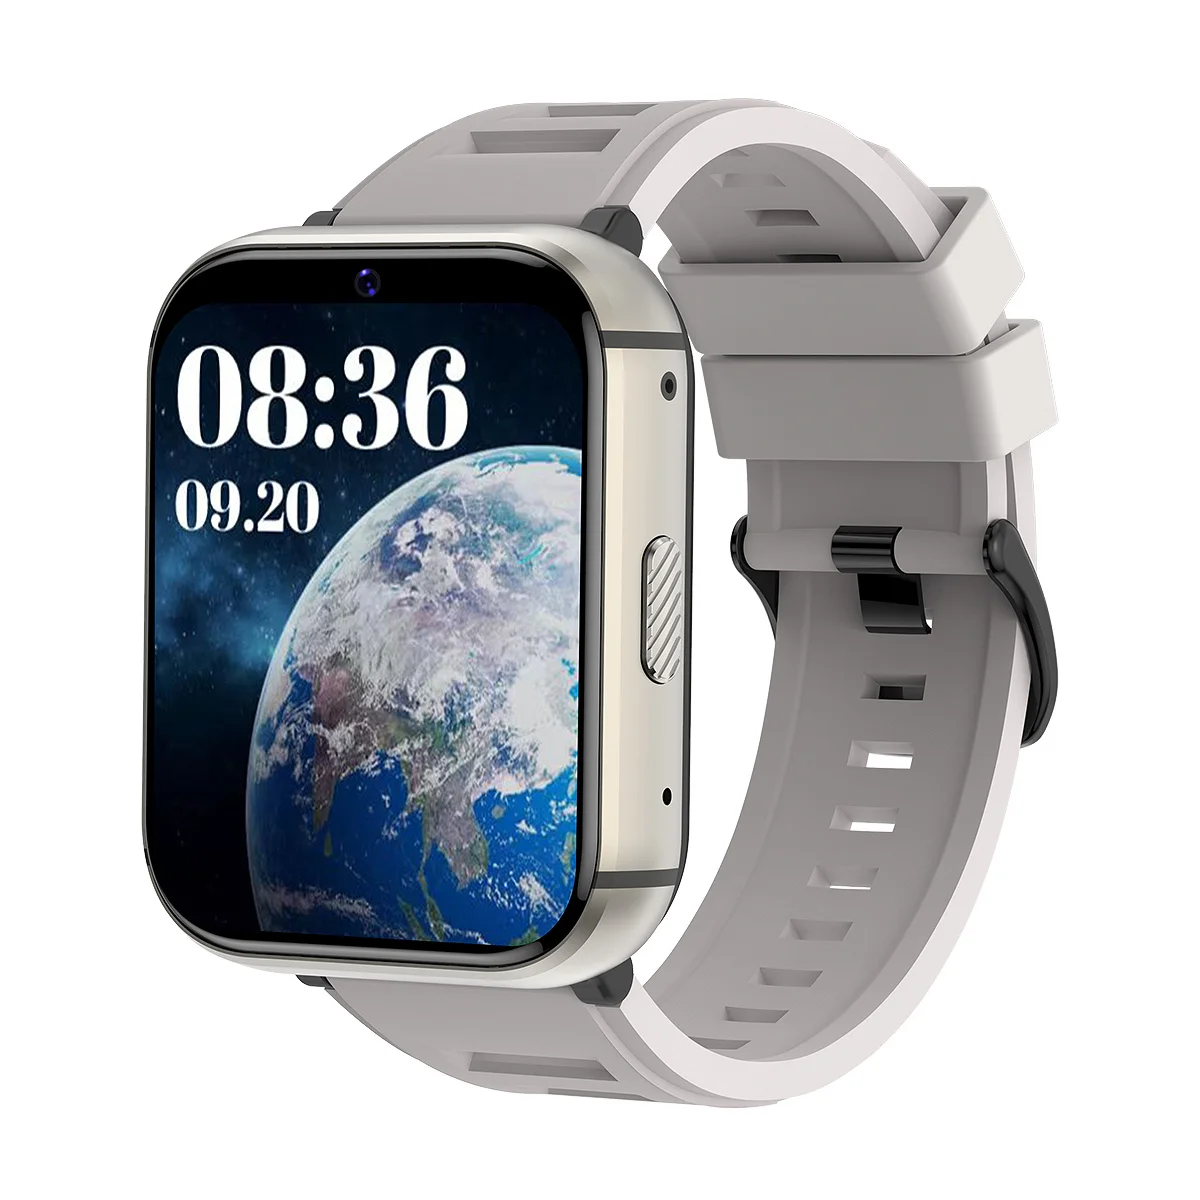 

2023 new Q668 Smart Watch 1.99 Inches Large Screen Android 4G Bluetooth Heart Rate Monitor WIFI Internet GPS Bracelet Smartwatch